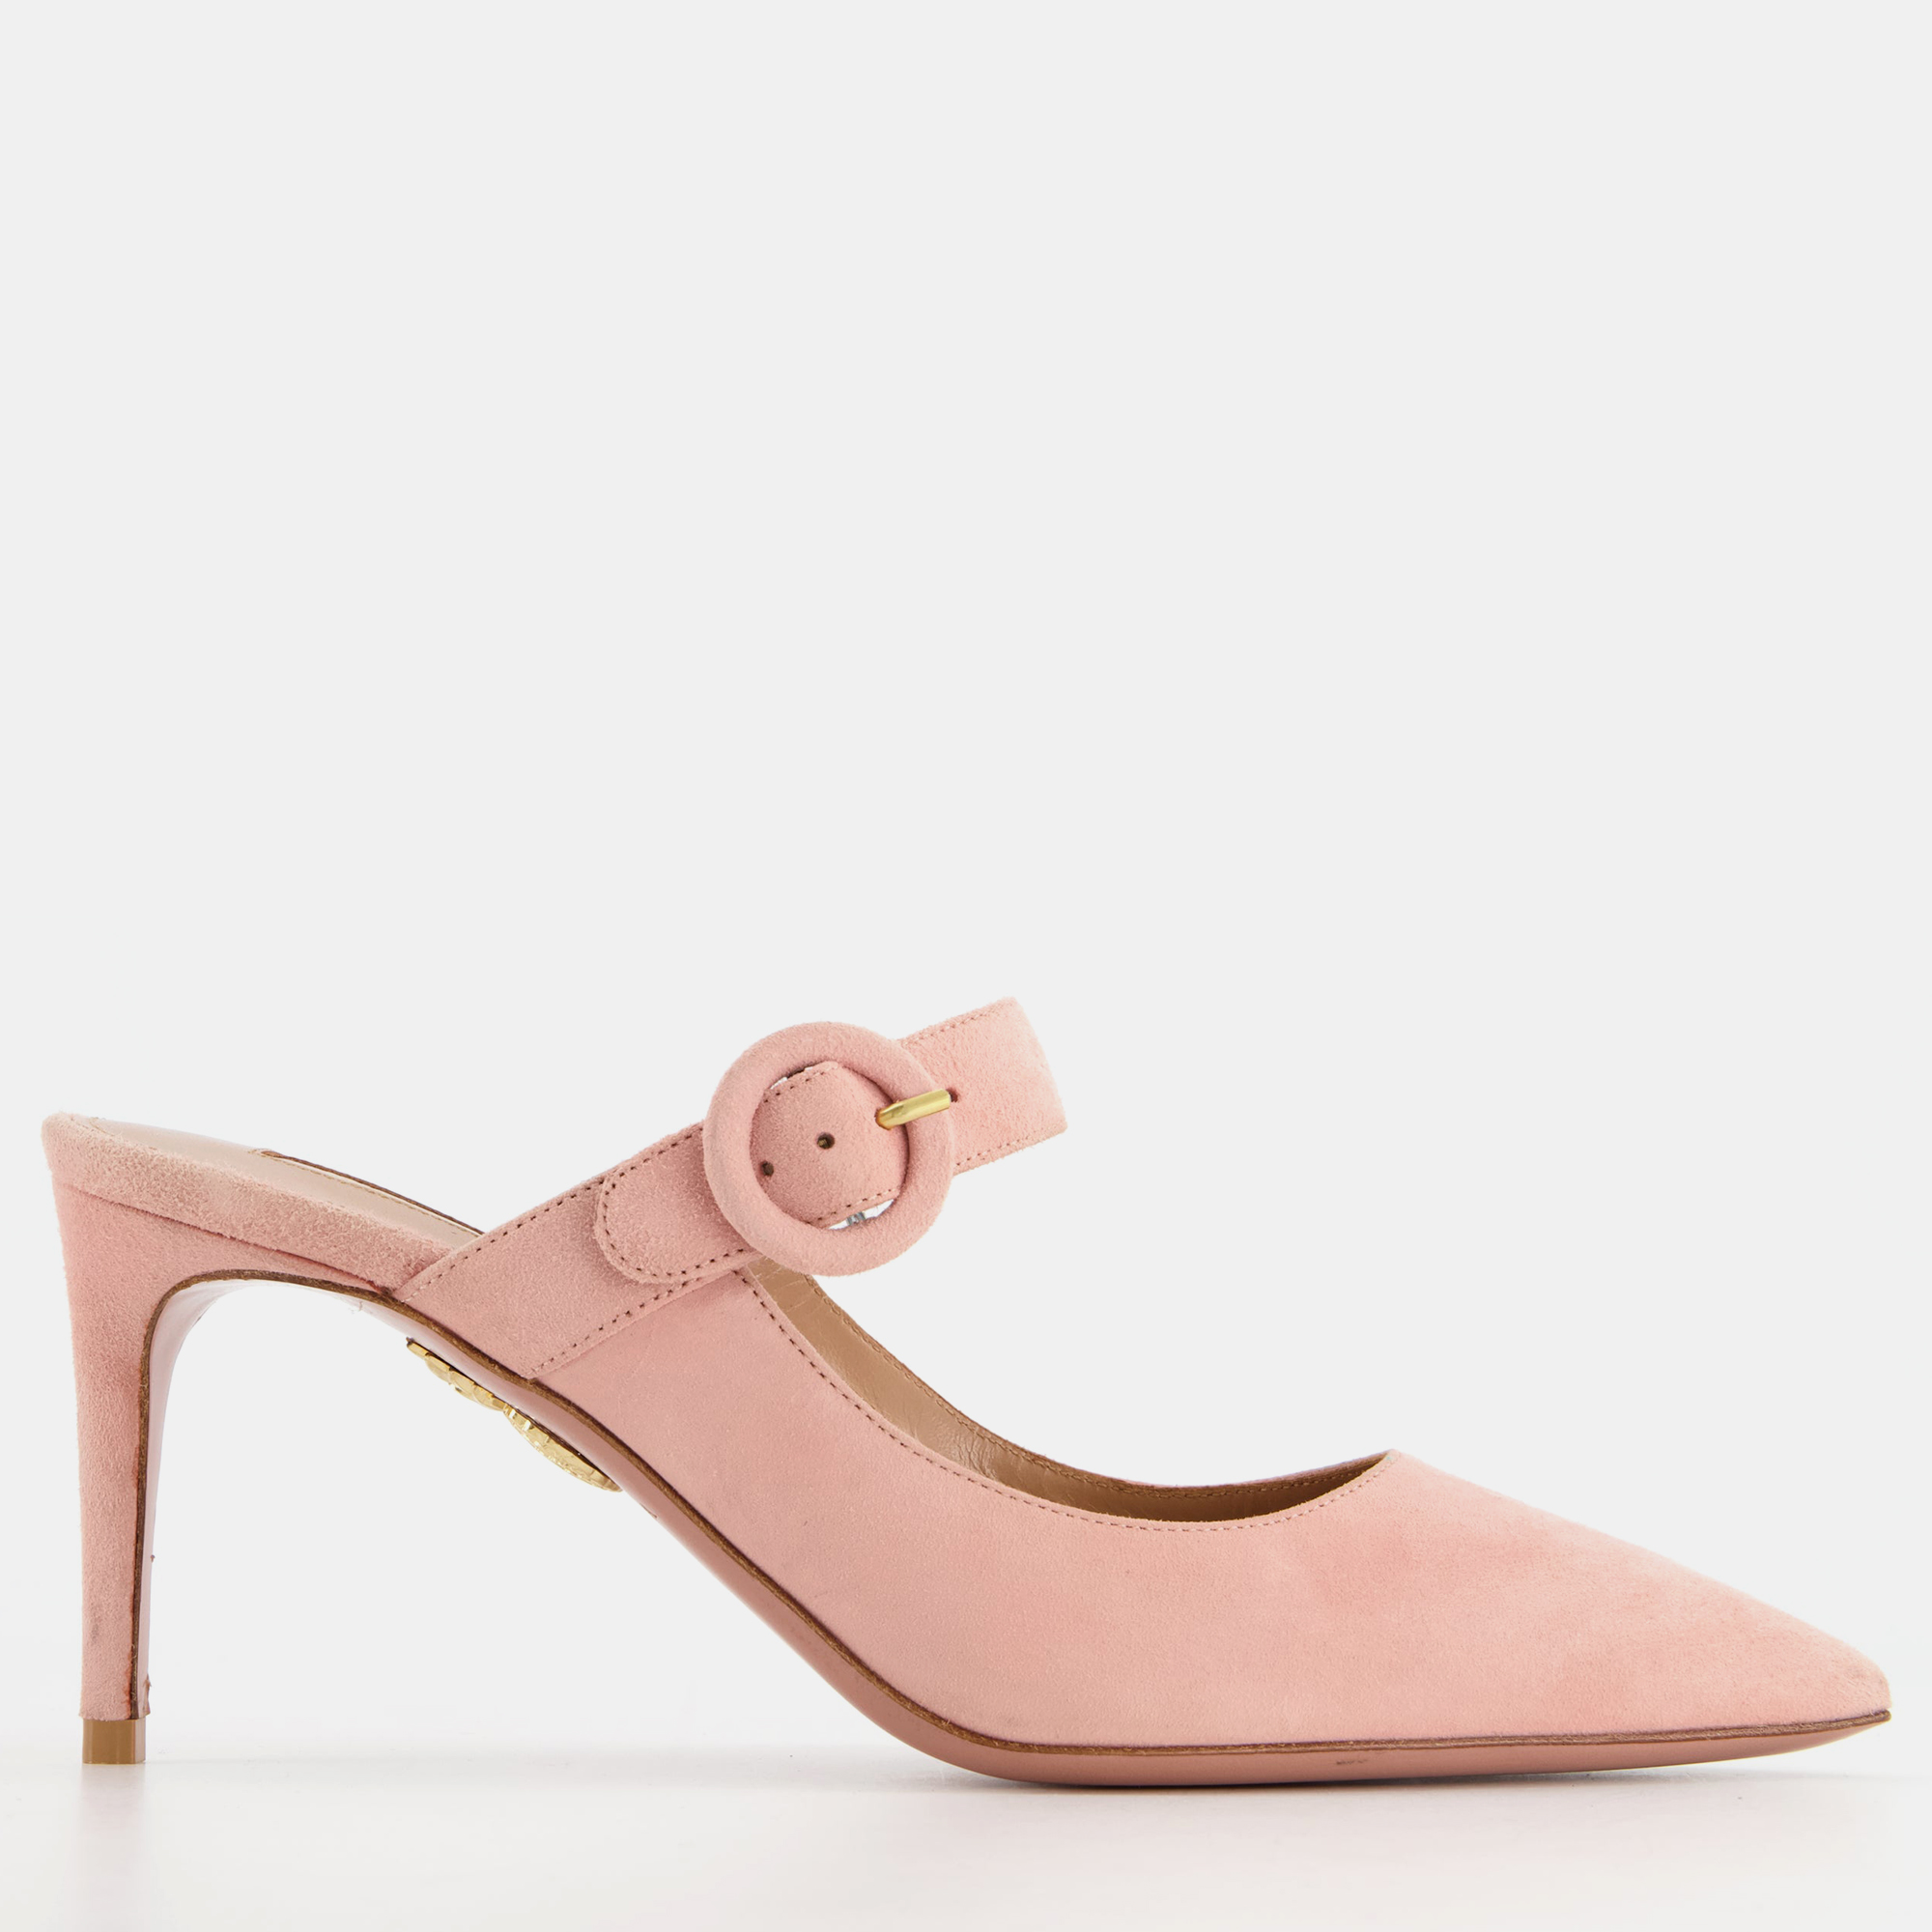 

Aquazzura Light Pink Suede Mules with Buckle Strap Size